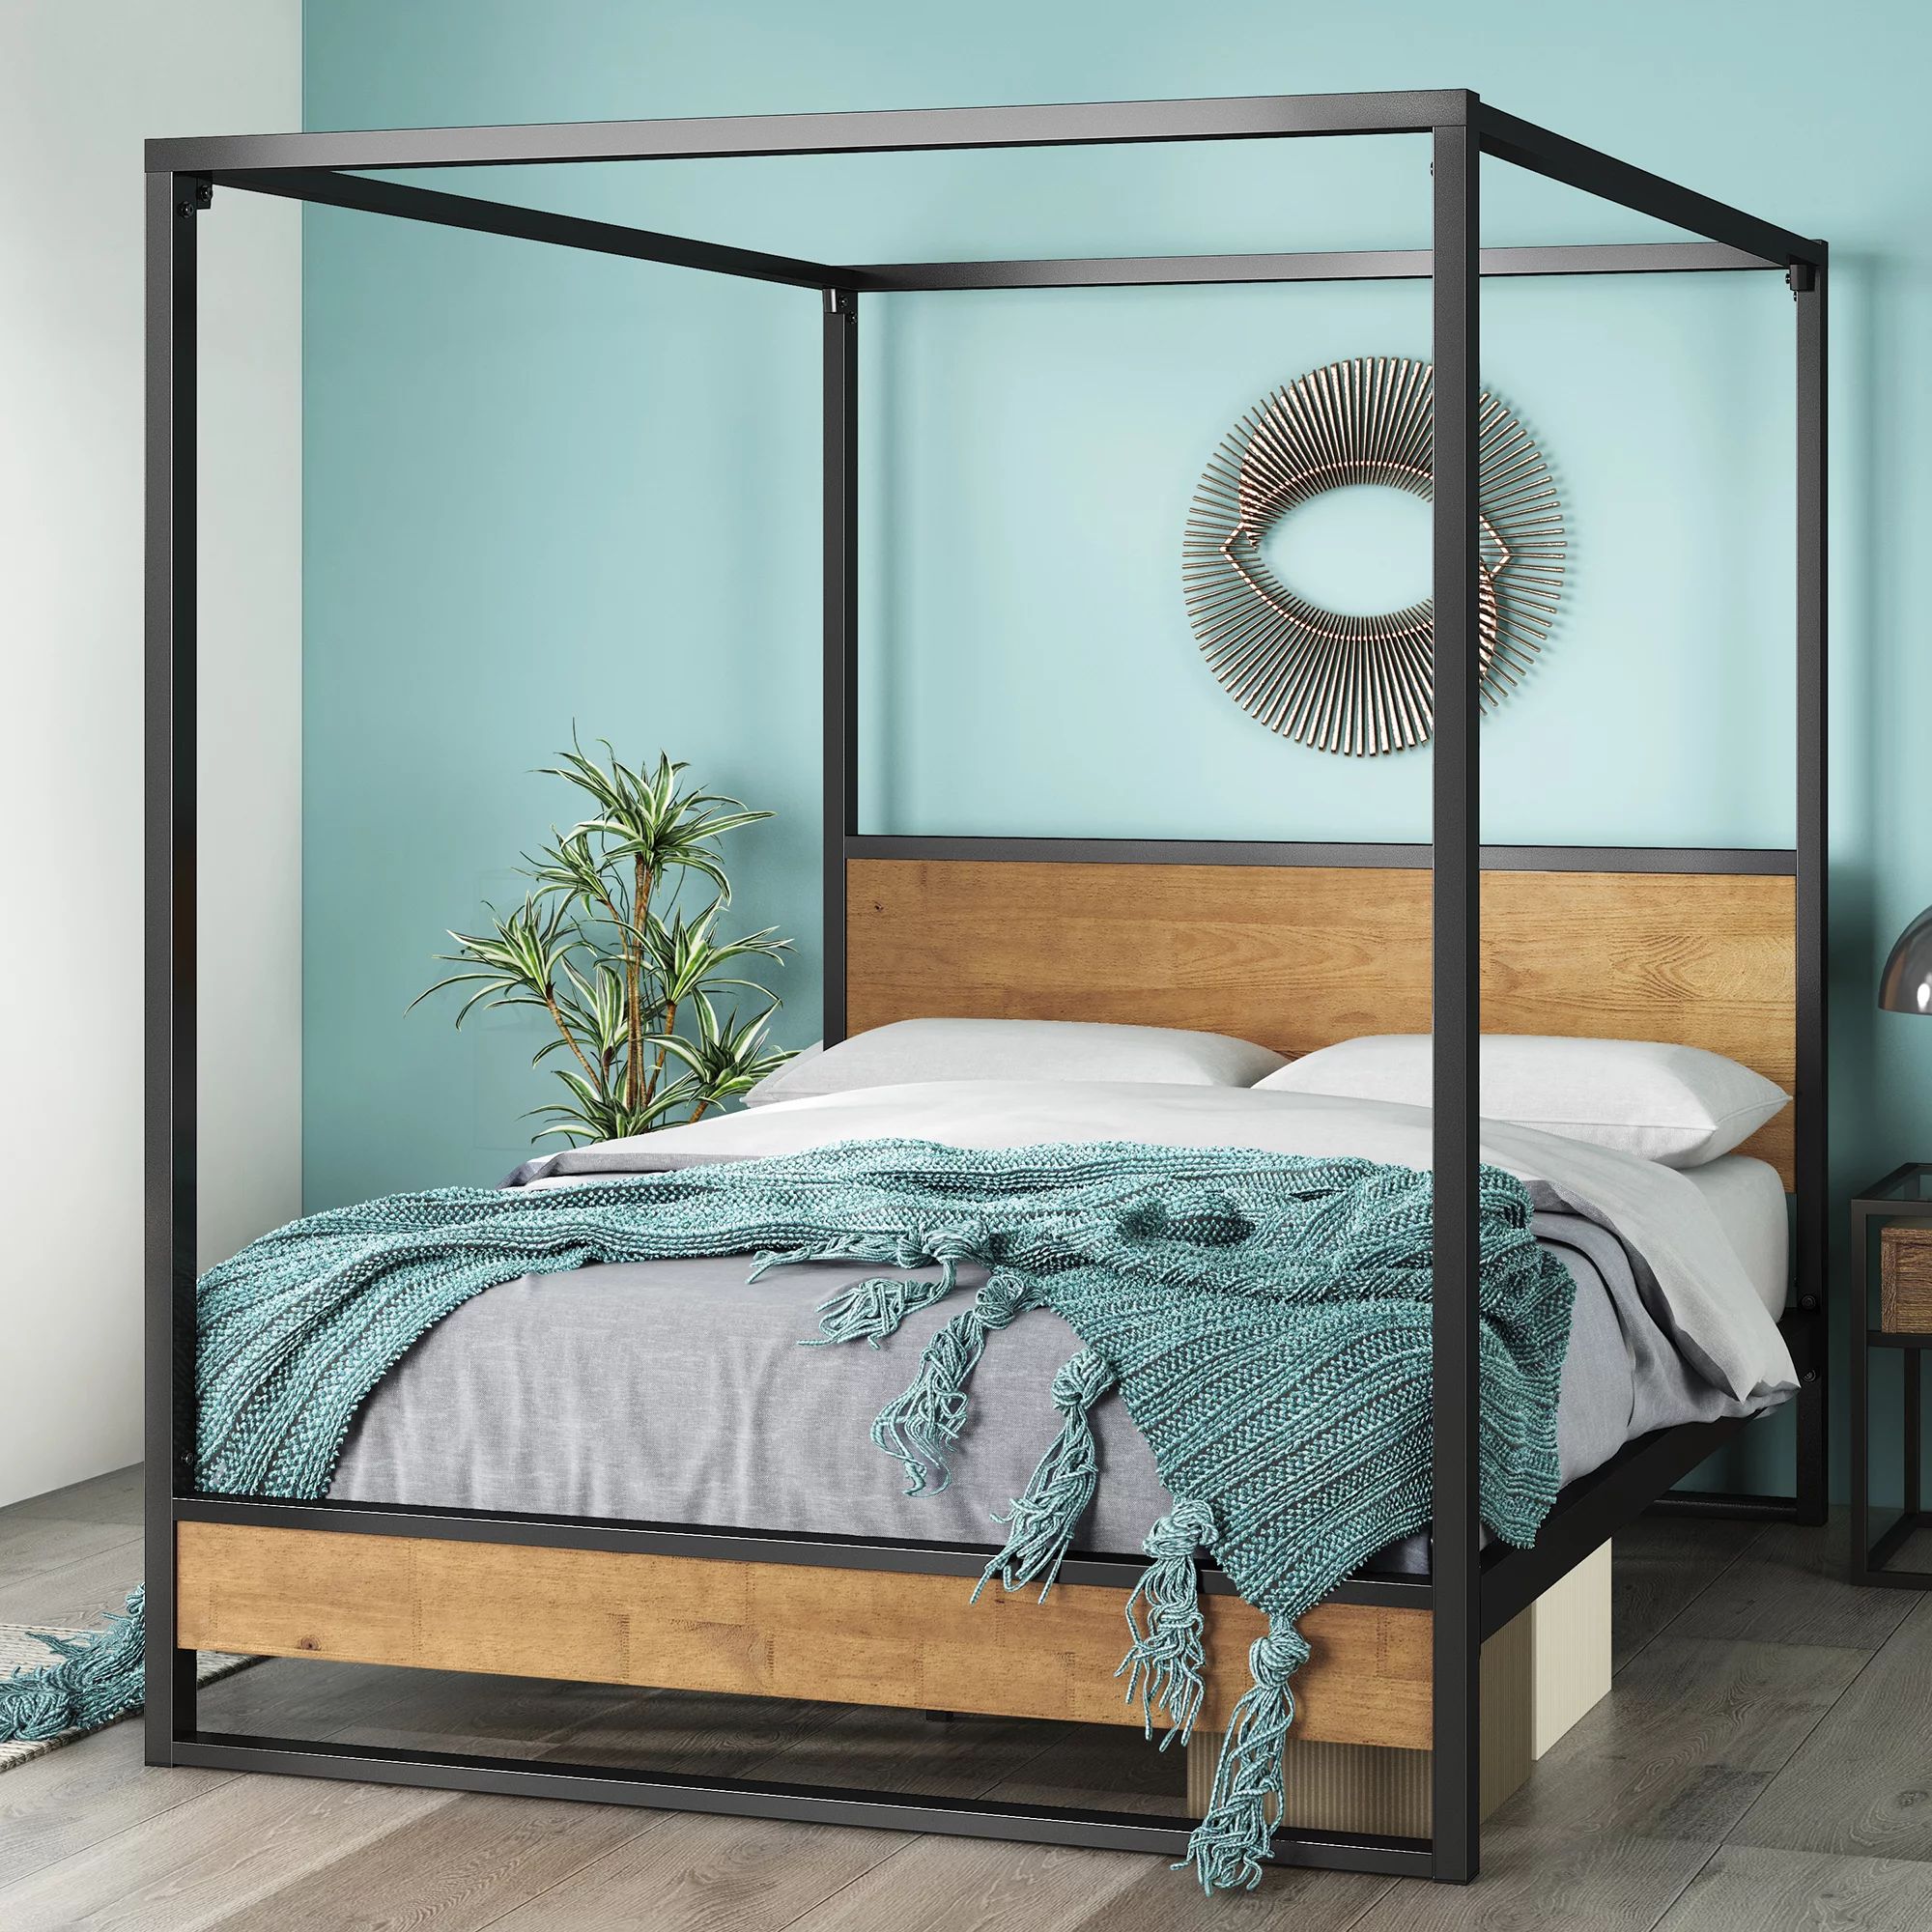 Zinus Suzanne 72” Metal and Wood Canopy Platform Bed Frame, Twin | Walmart (US)